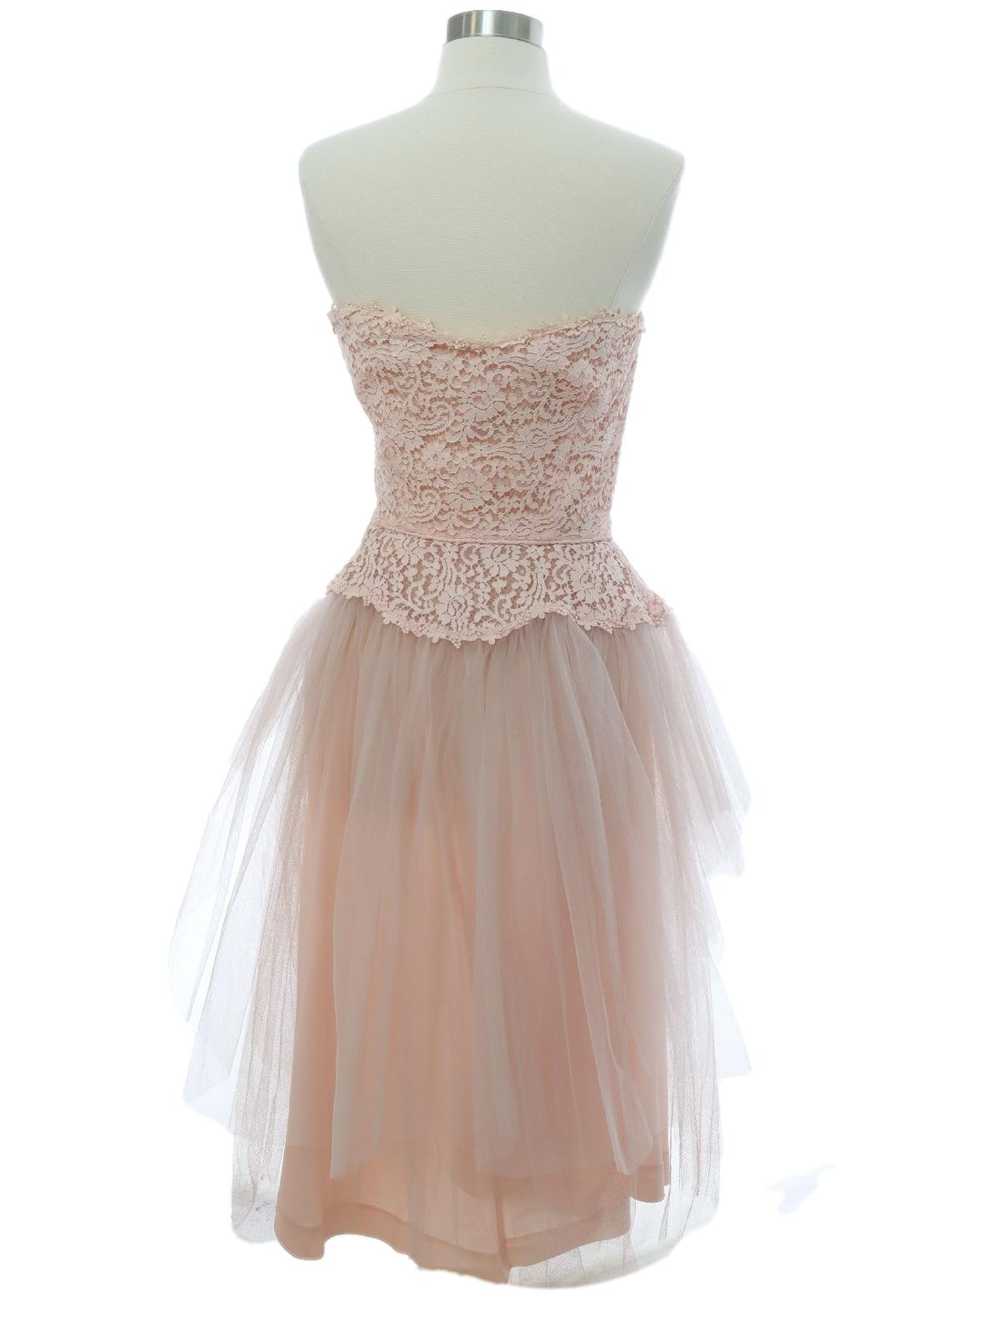 1960's Cocktail or Prom Dress - image 3